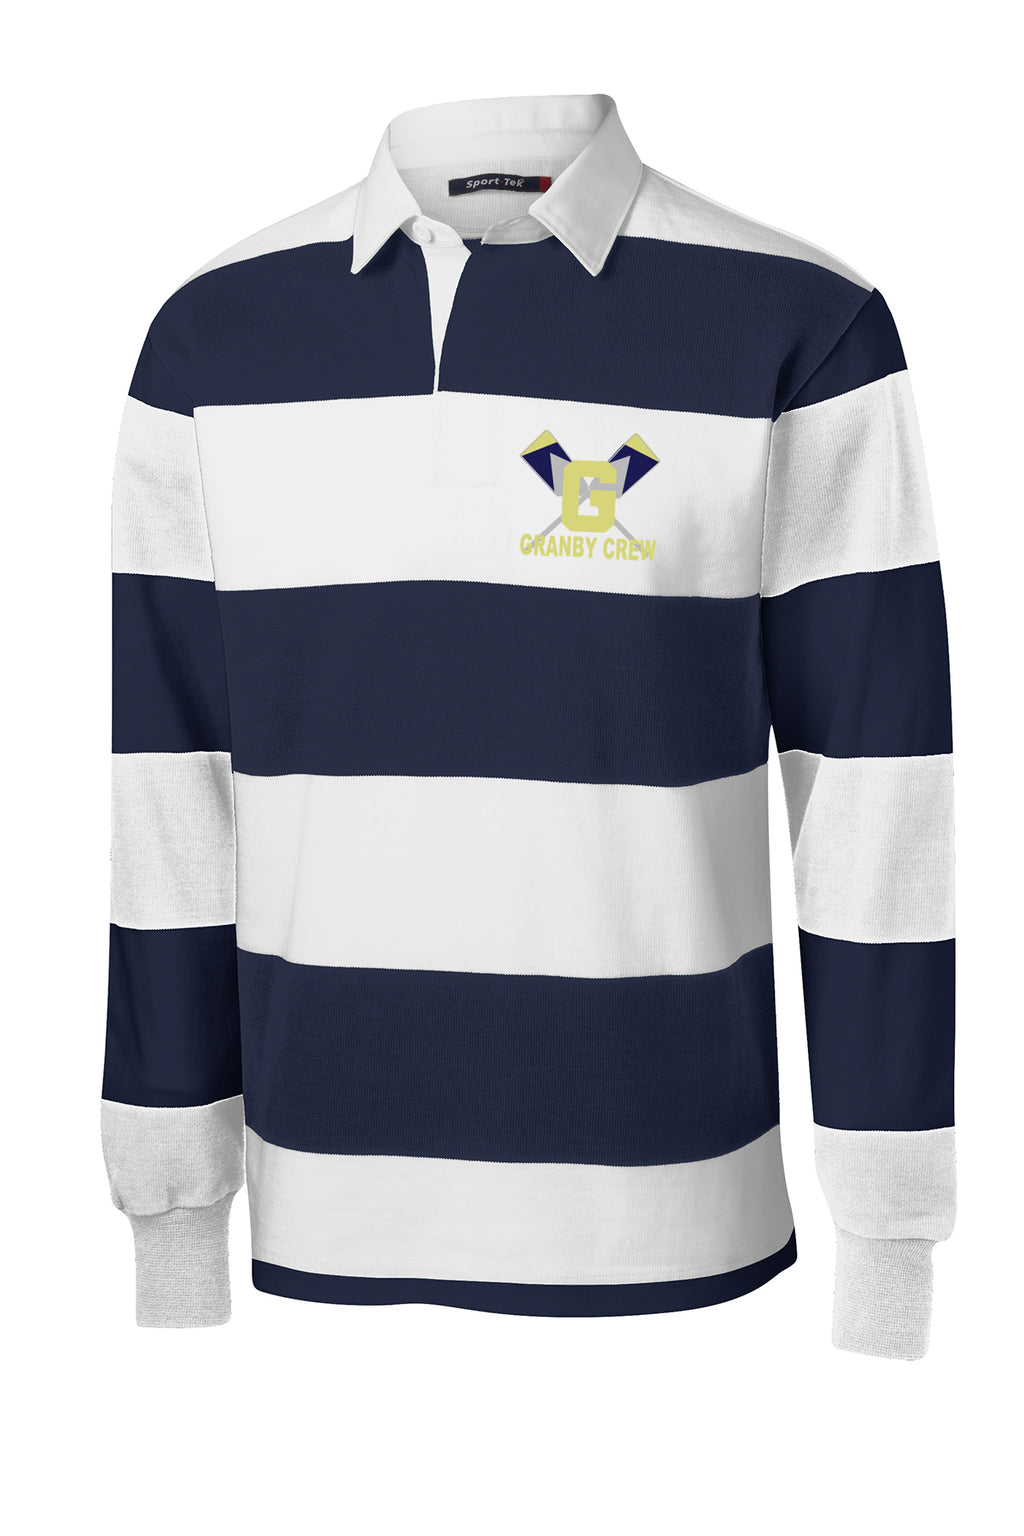 Granby Crew Rugby Shirt